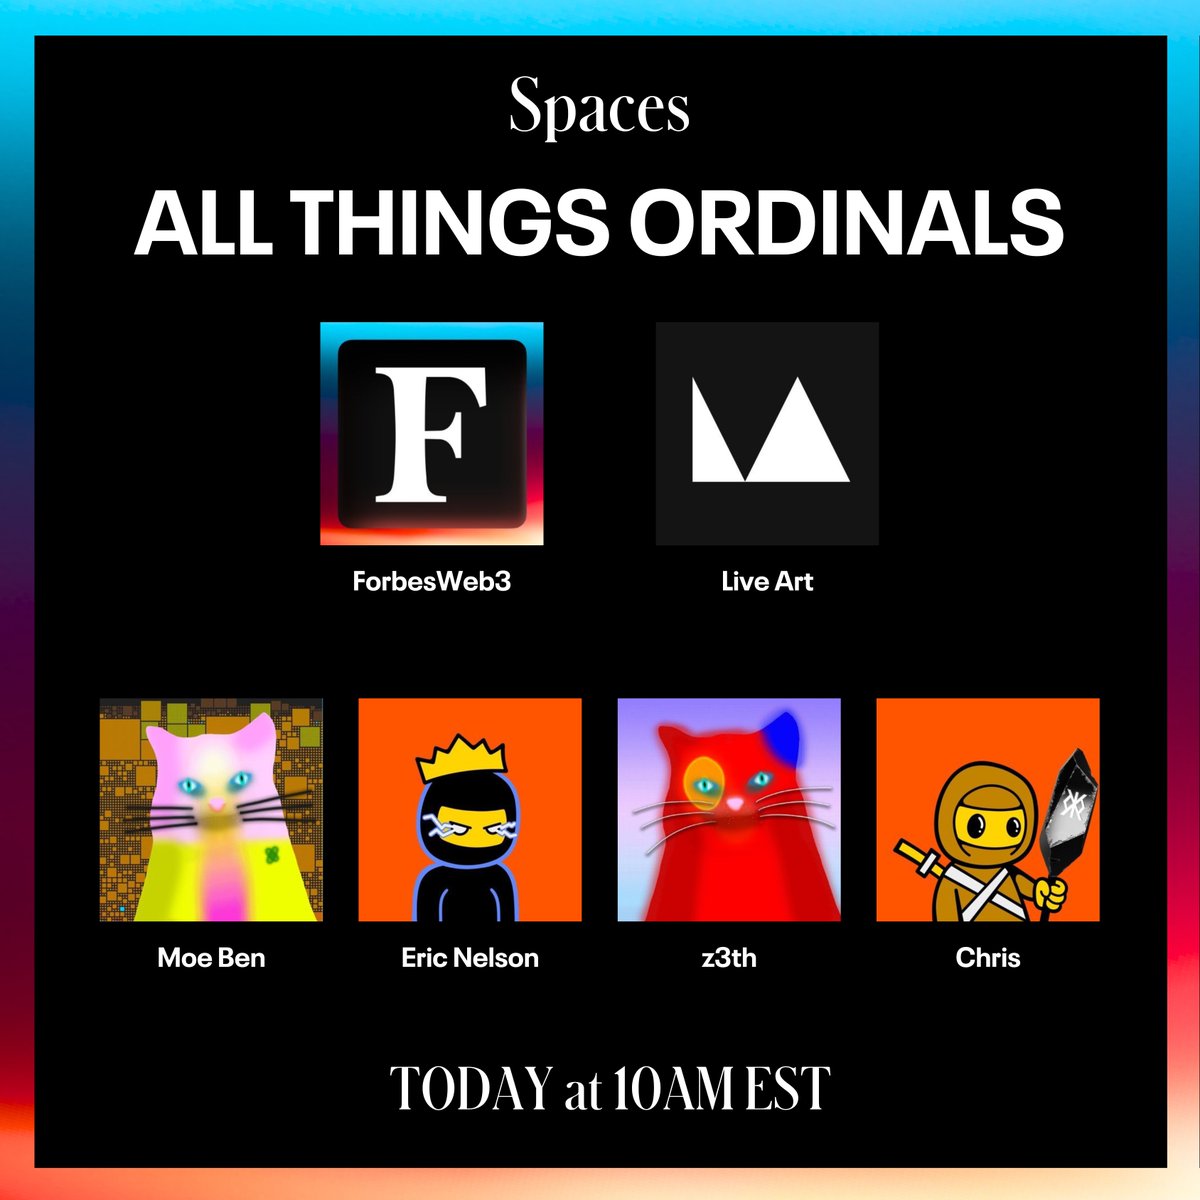 SPACES FOR ALL THINGS ORDINALS 🧡🌟

Join us today at 10AM EST with our frens @LiveArtX @moeben21 @ChrisCoffeeEth @EricNelson @z3thnft